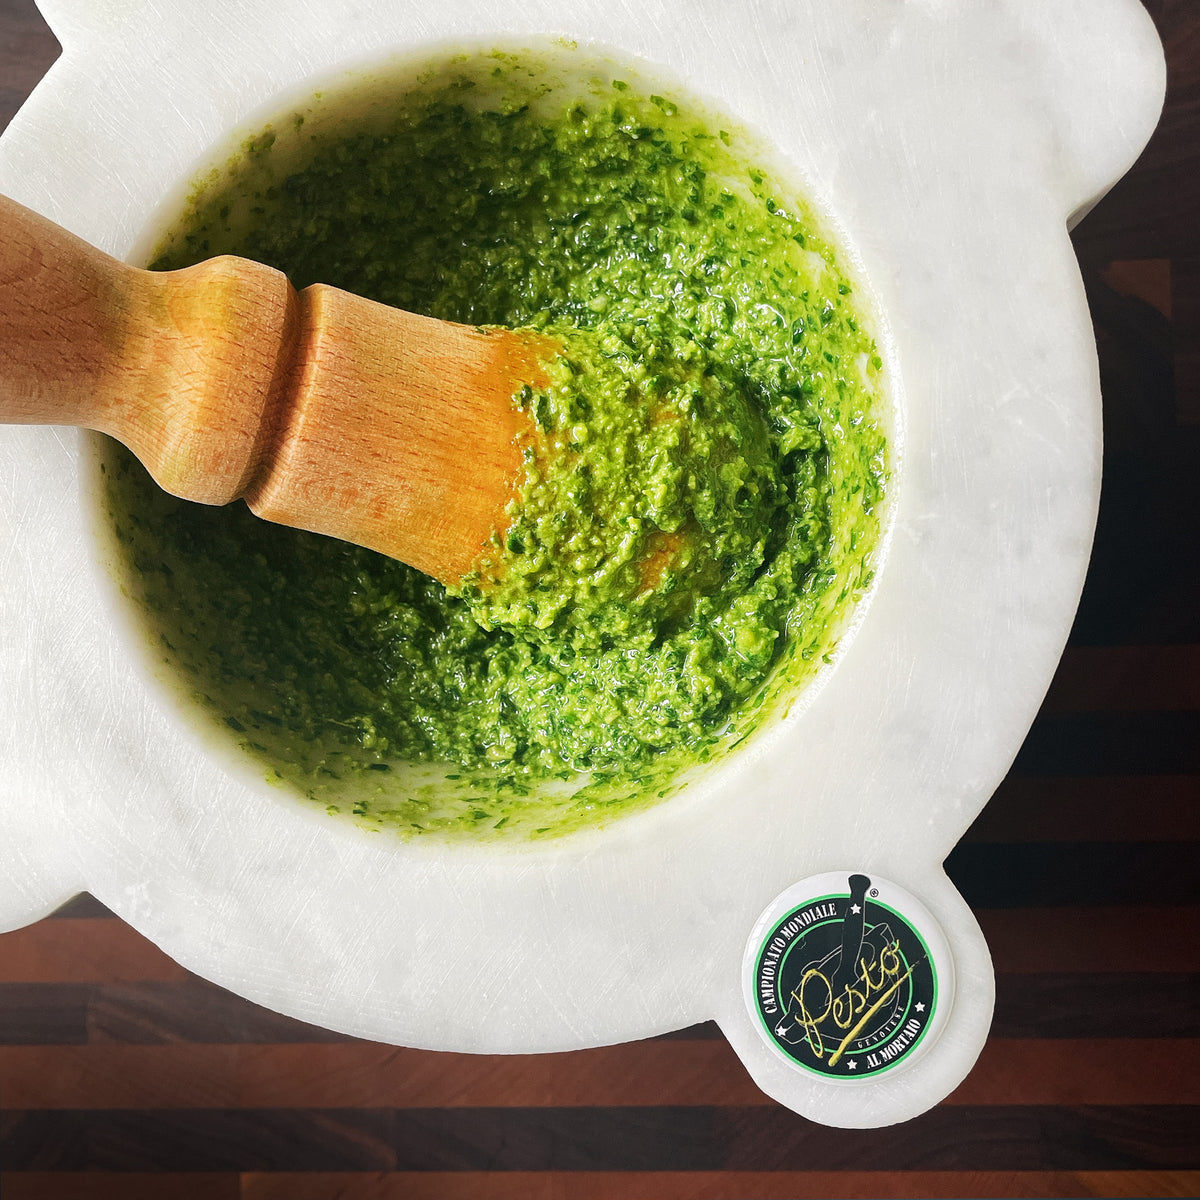 Basil pesto being made in a pestle and mortar